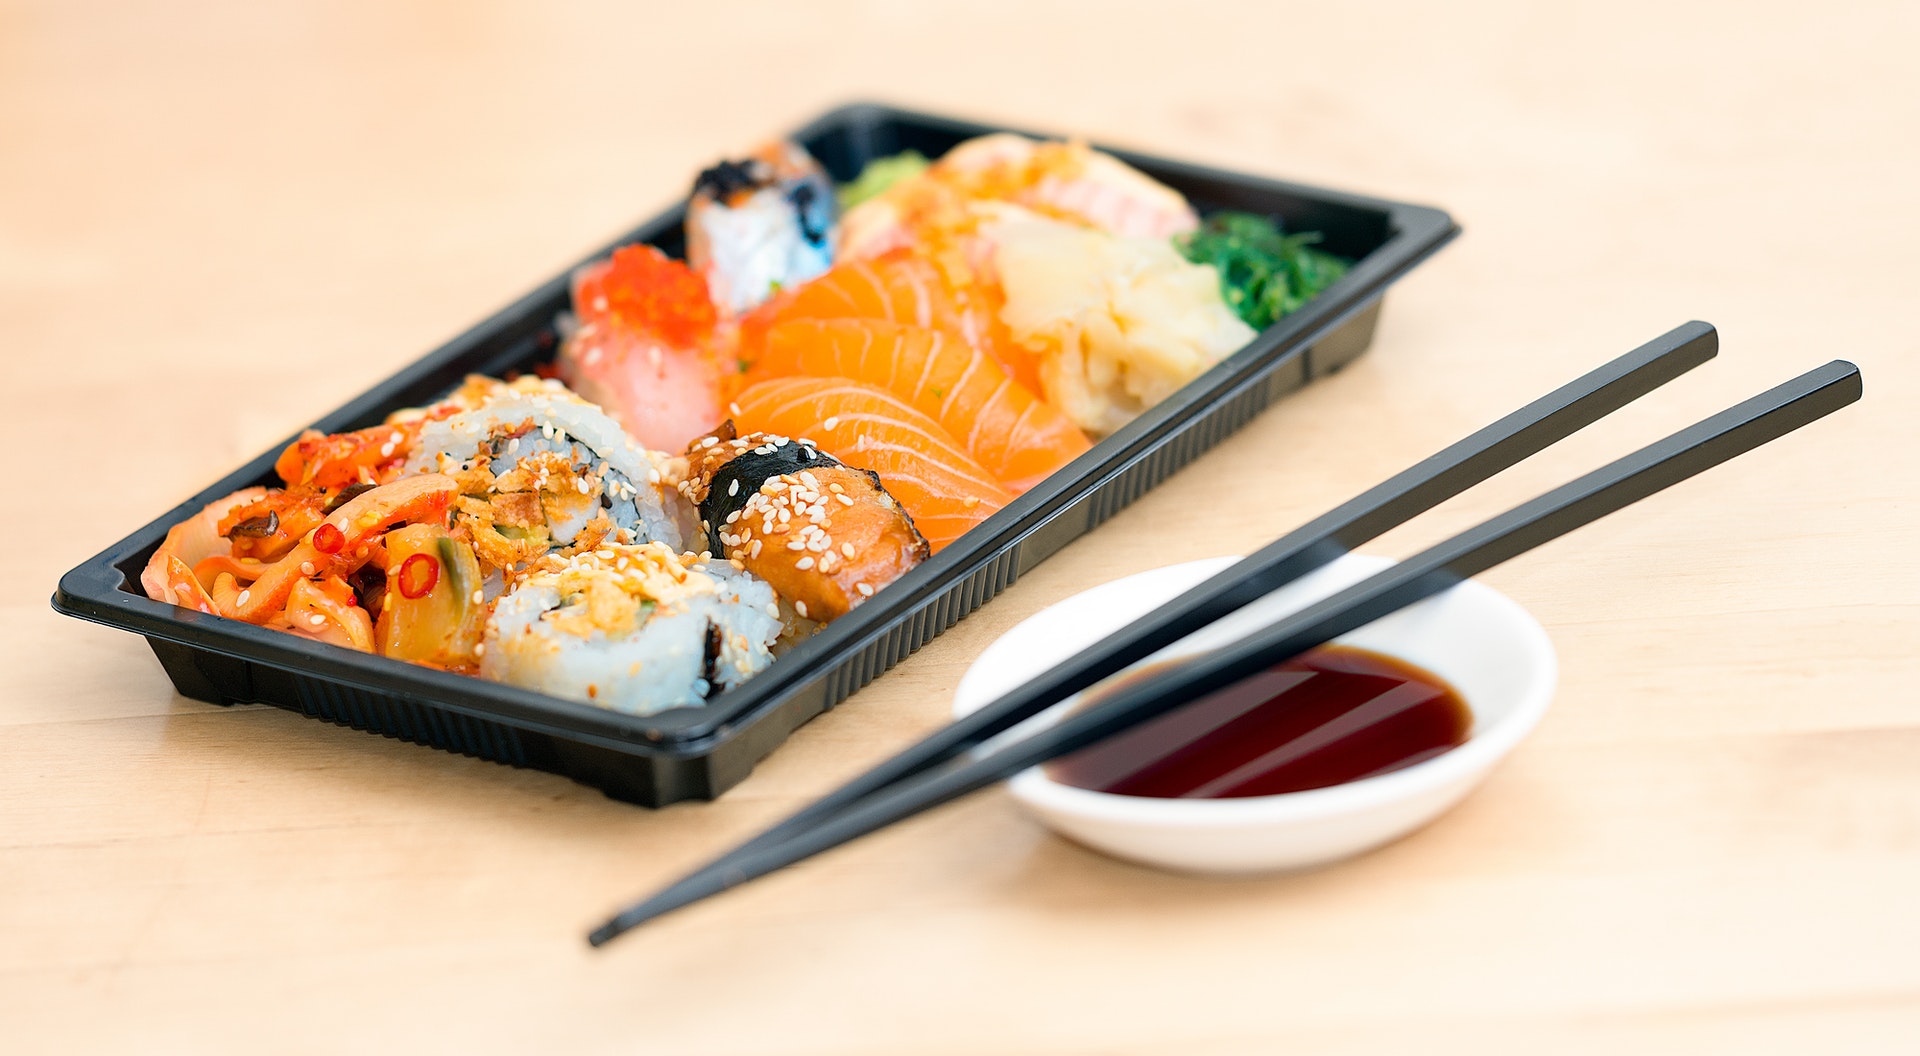 close-up-photo-of-sushi-served-on-table-248444.jpg